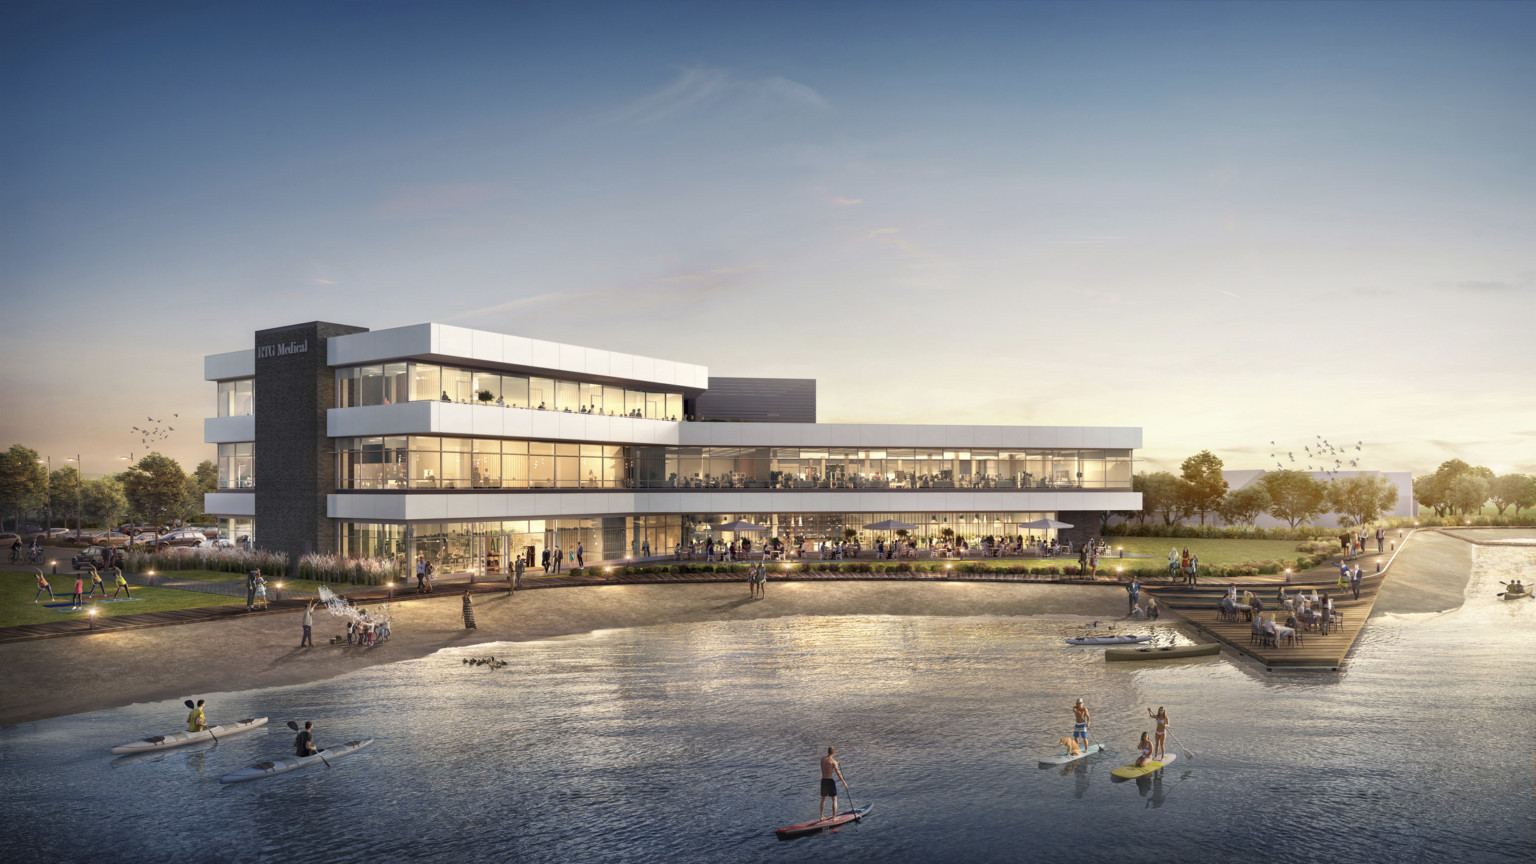 RTG Medical Headquarters viewed from across the water. A 3 story building with large windows and waterfront patio and dock